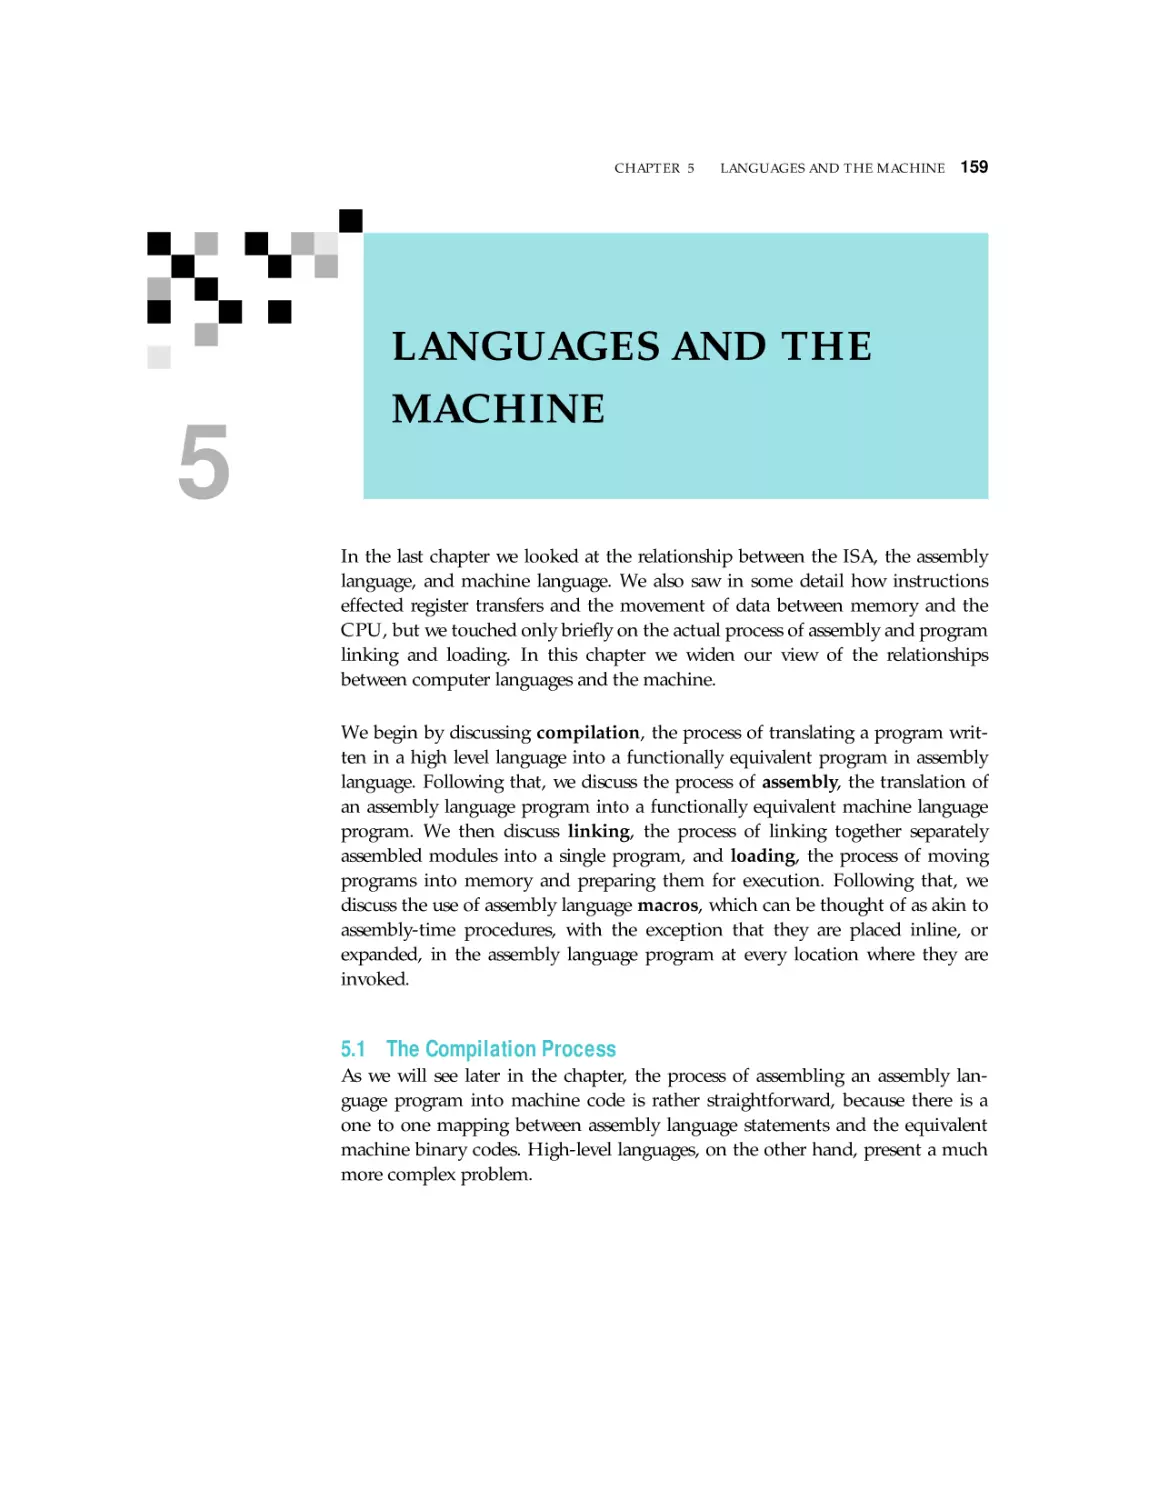 5. LANGUAGES AND THE MACHINE